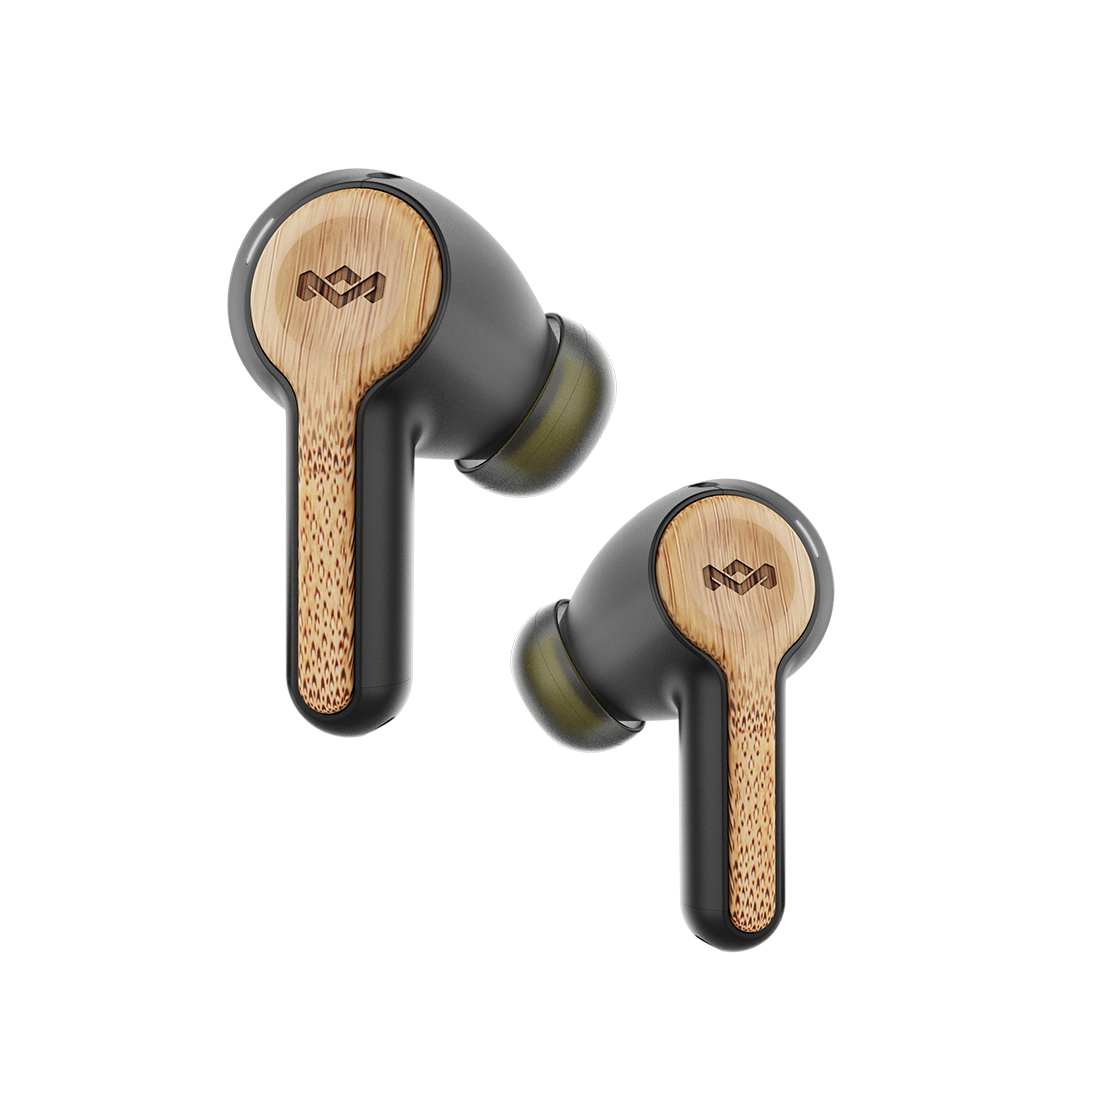 ÉCOUTEURS INTRA-AURICULAIRES UPLIFT 2.0 – Marley-2020-fr